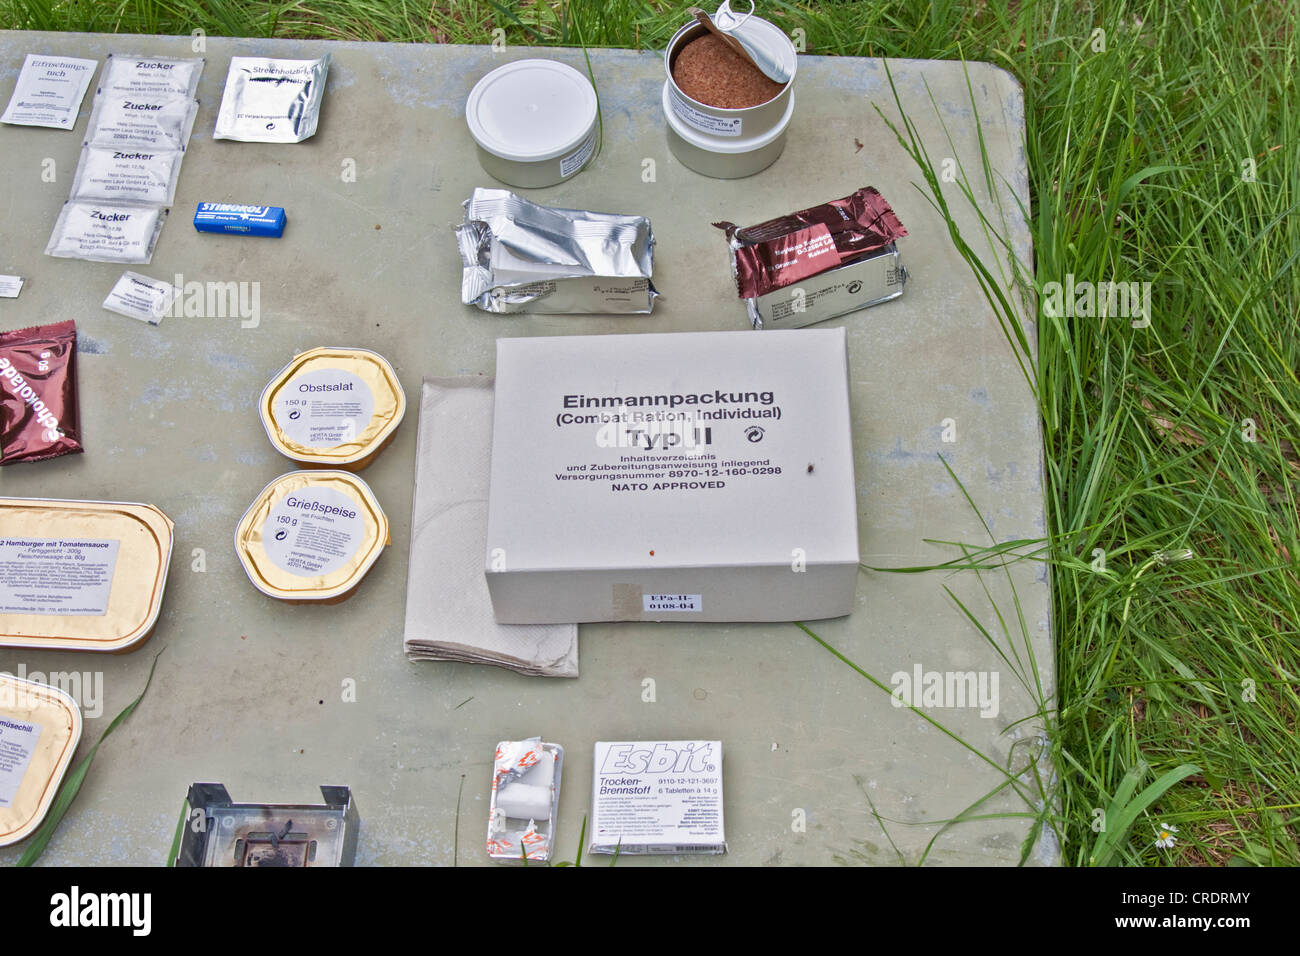 Food, rations, ration pack for one person, Bundeswehr Federal Armed Forces Stock Photo